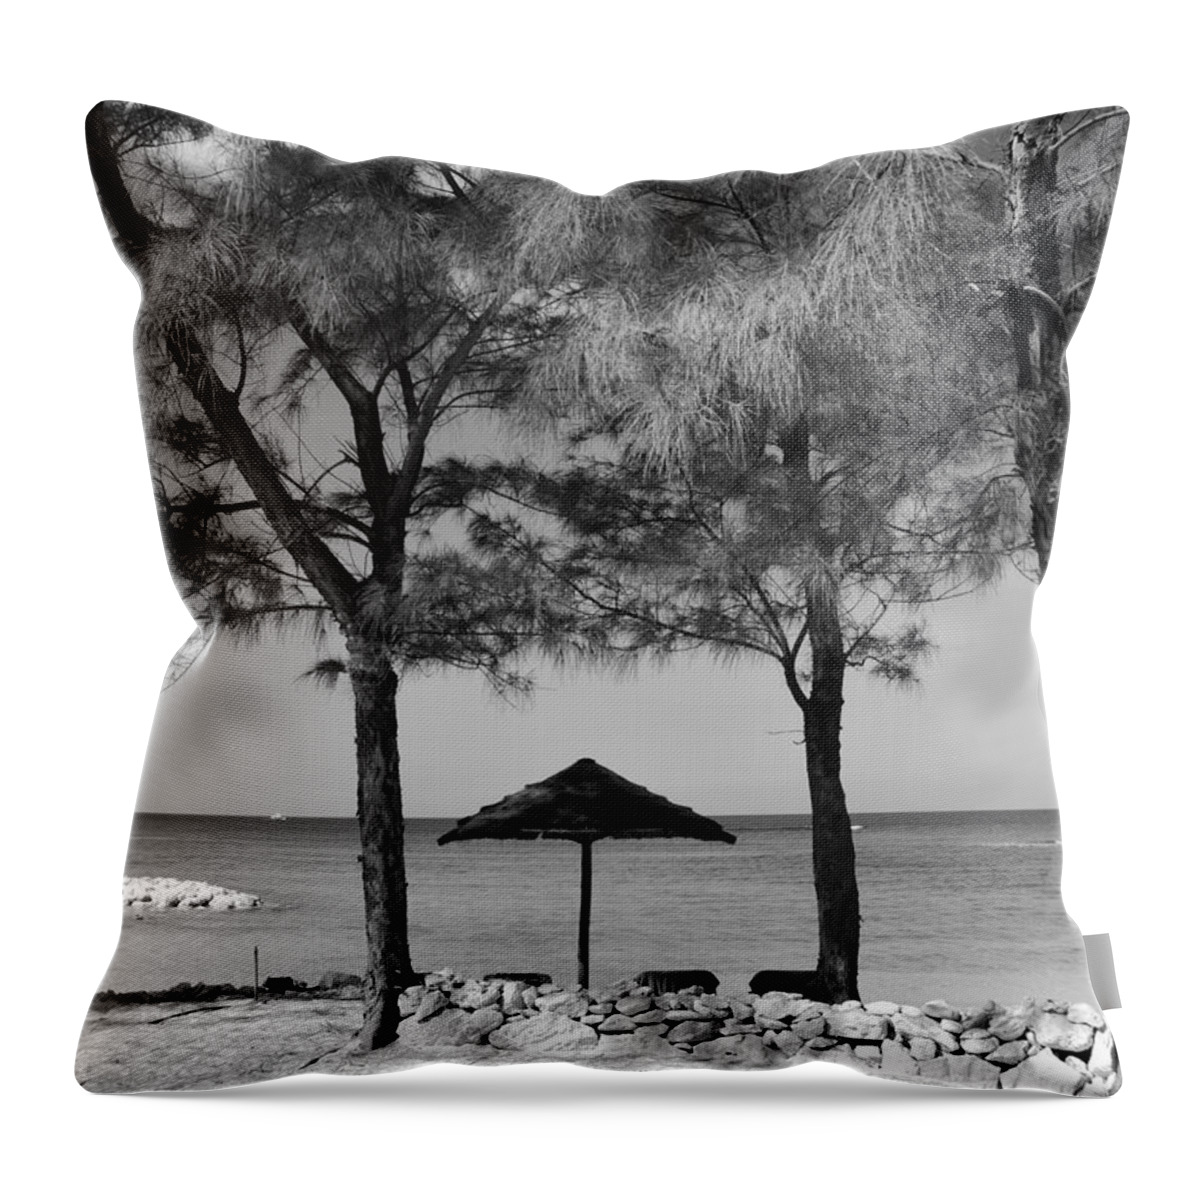 Black Throw Pillow featuring the photograph A Bahamas Scene In Black And White by Bob Sample